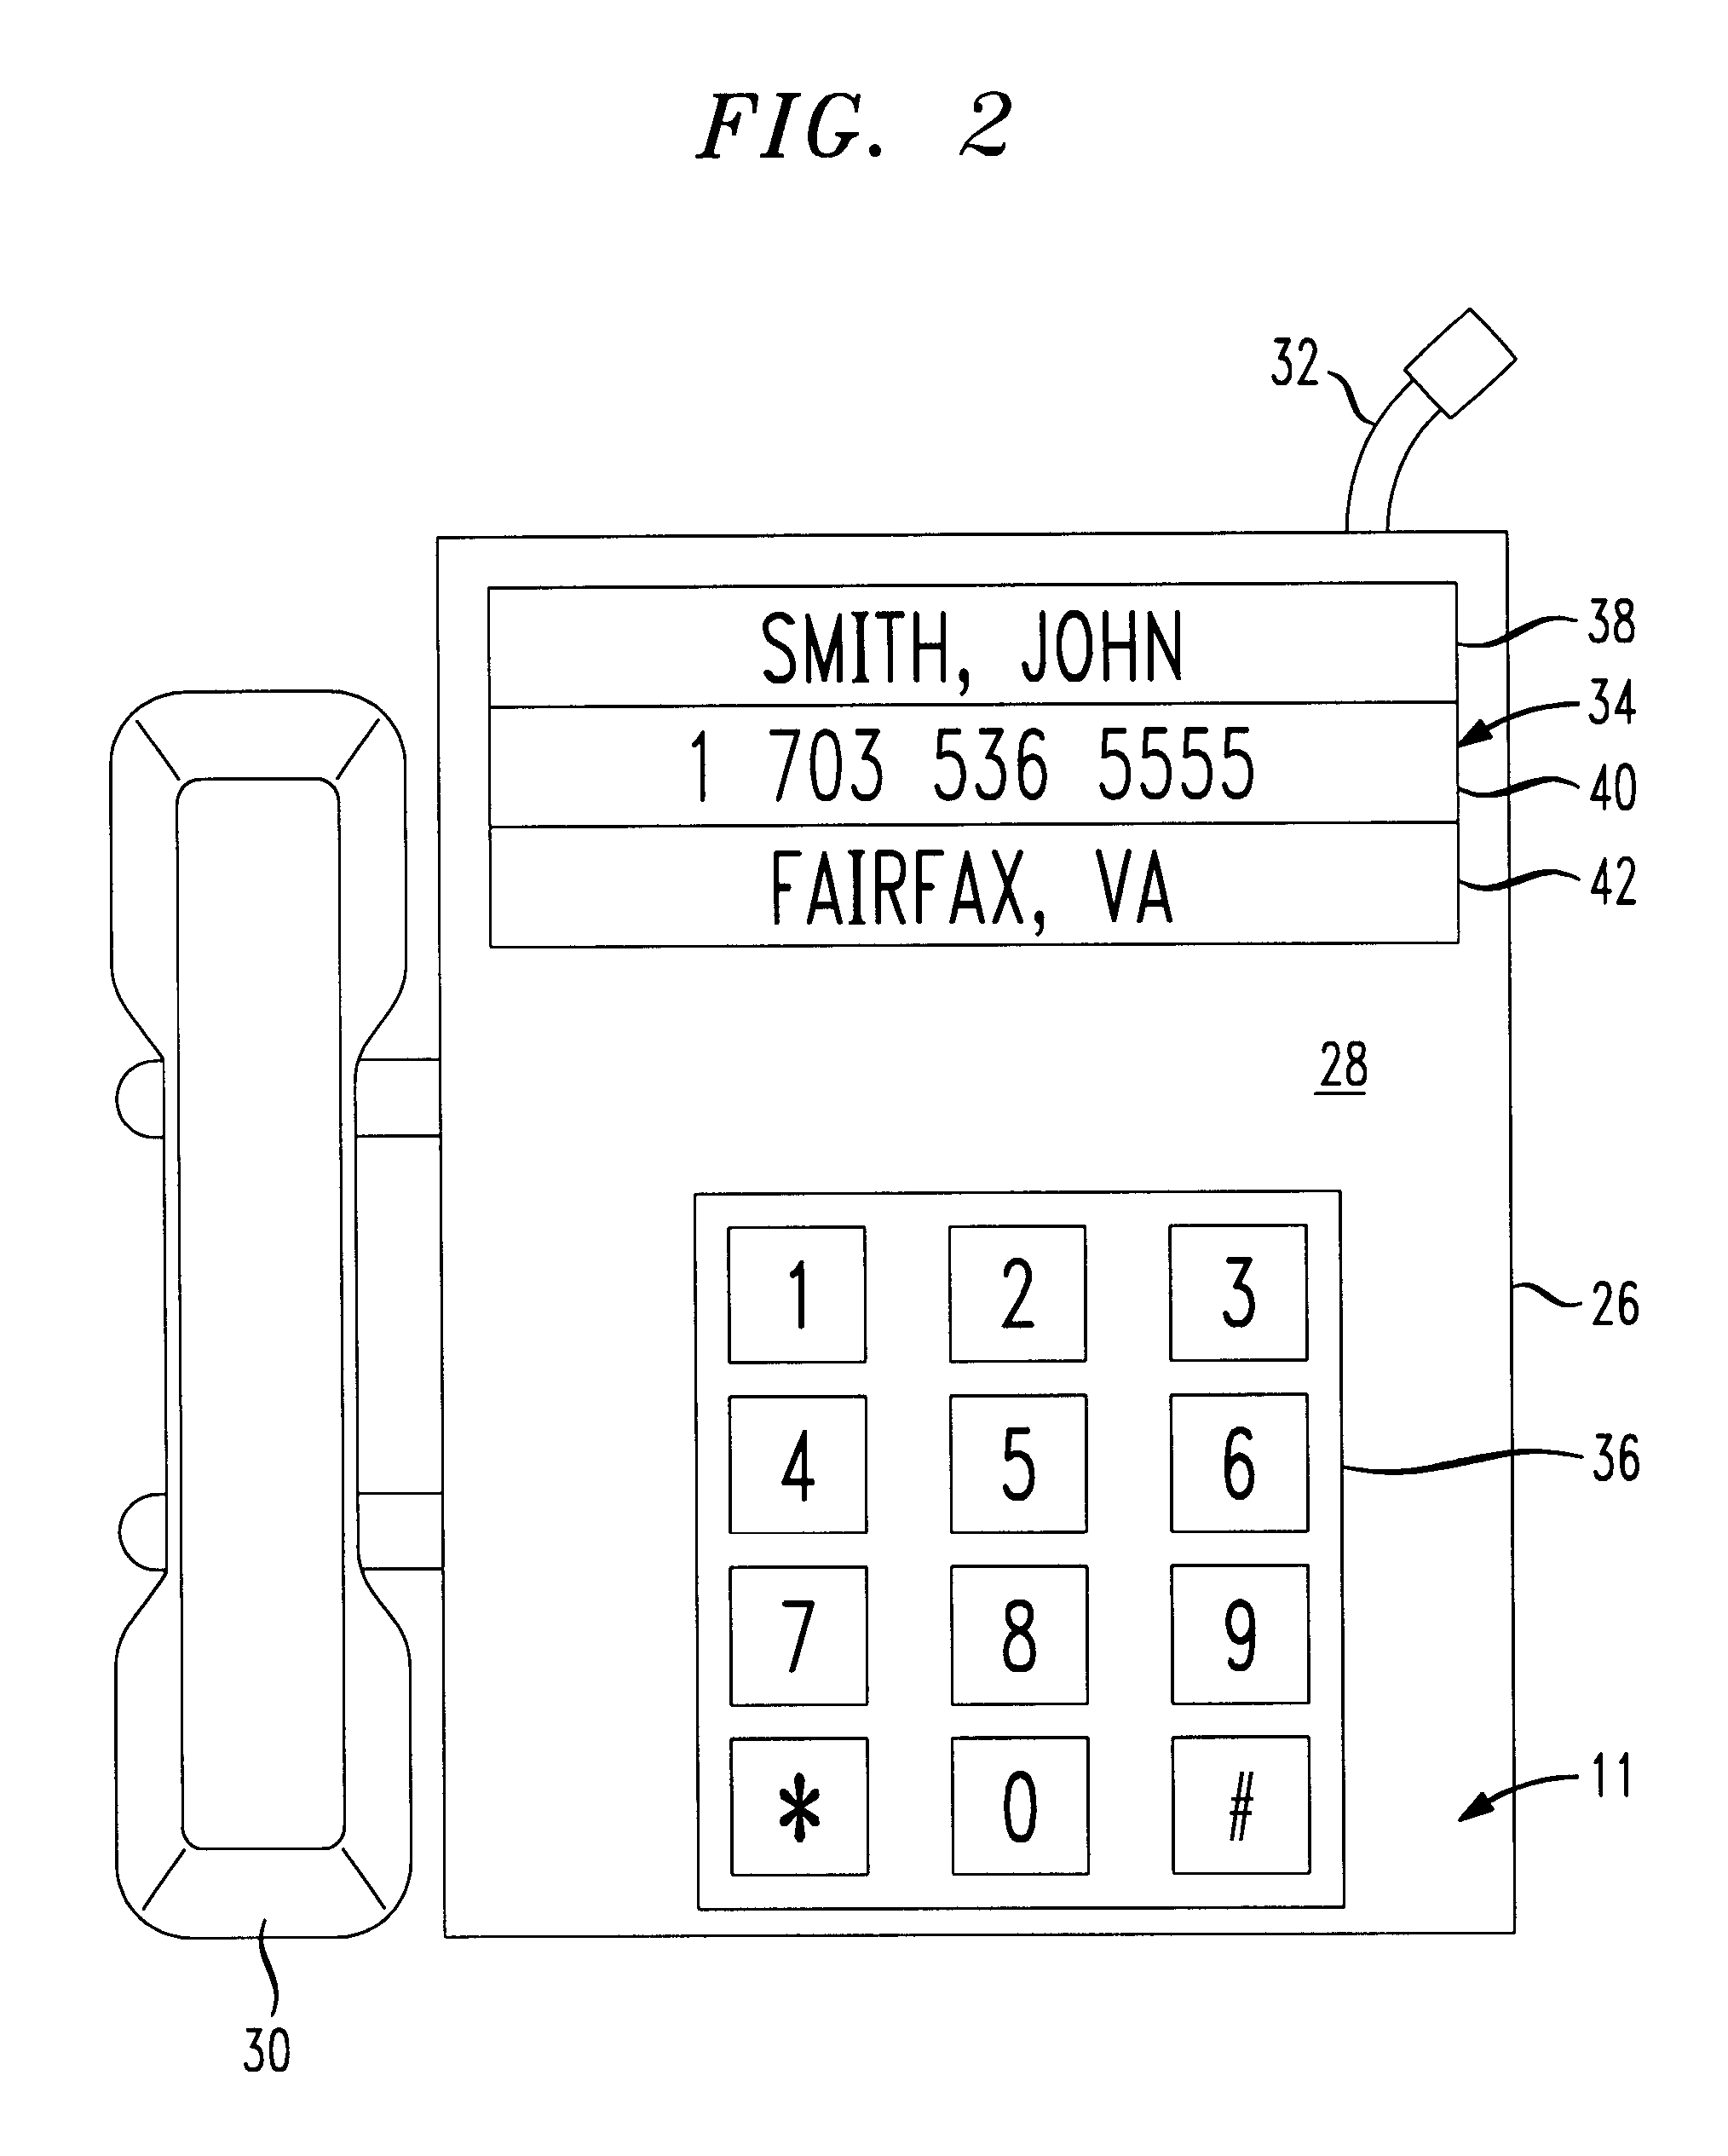 Caller ID equipment which displays location of caller